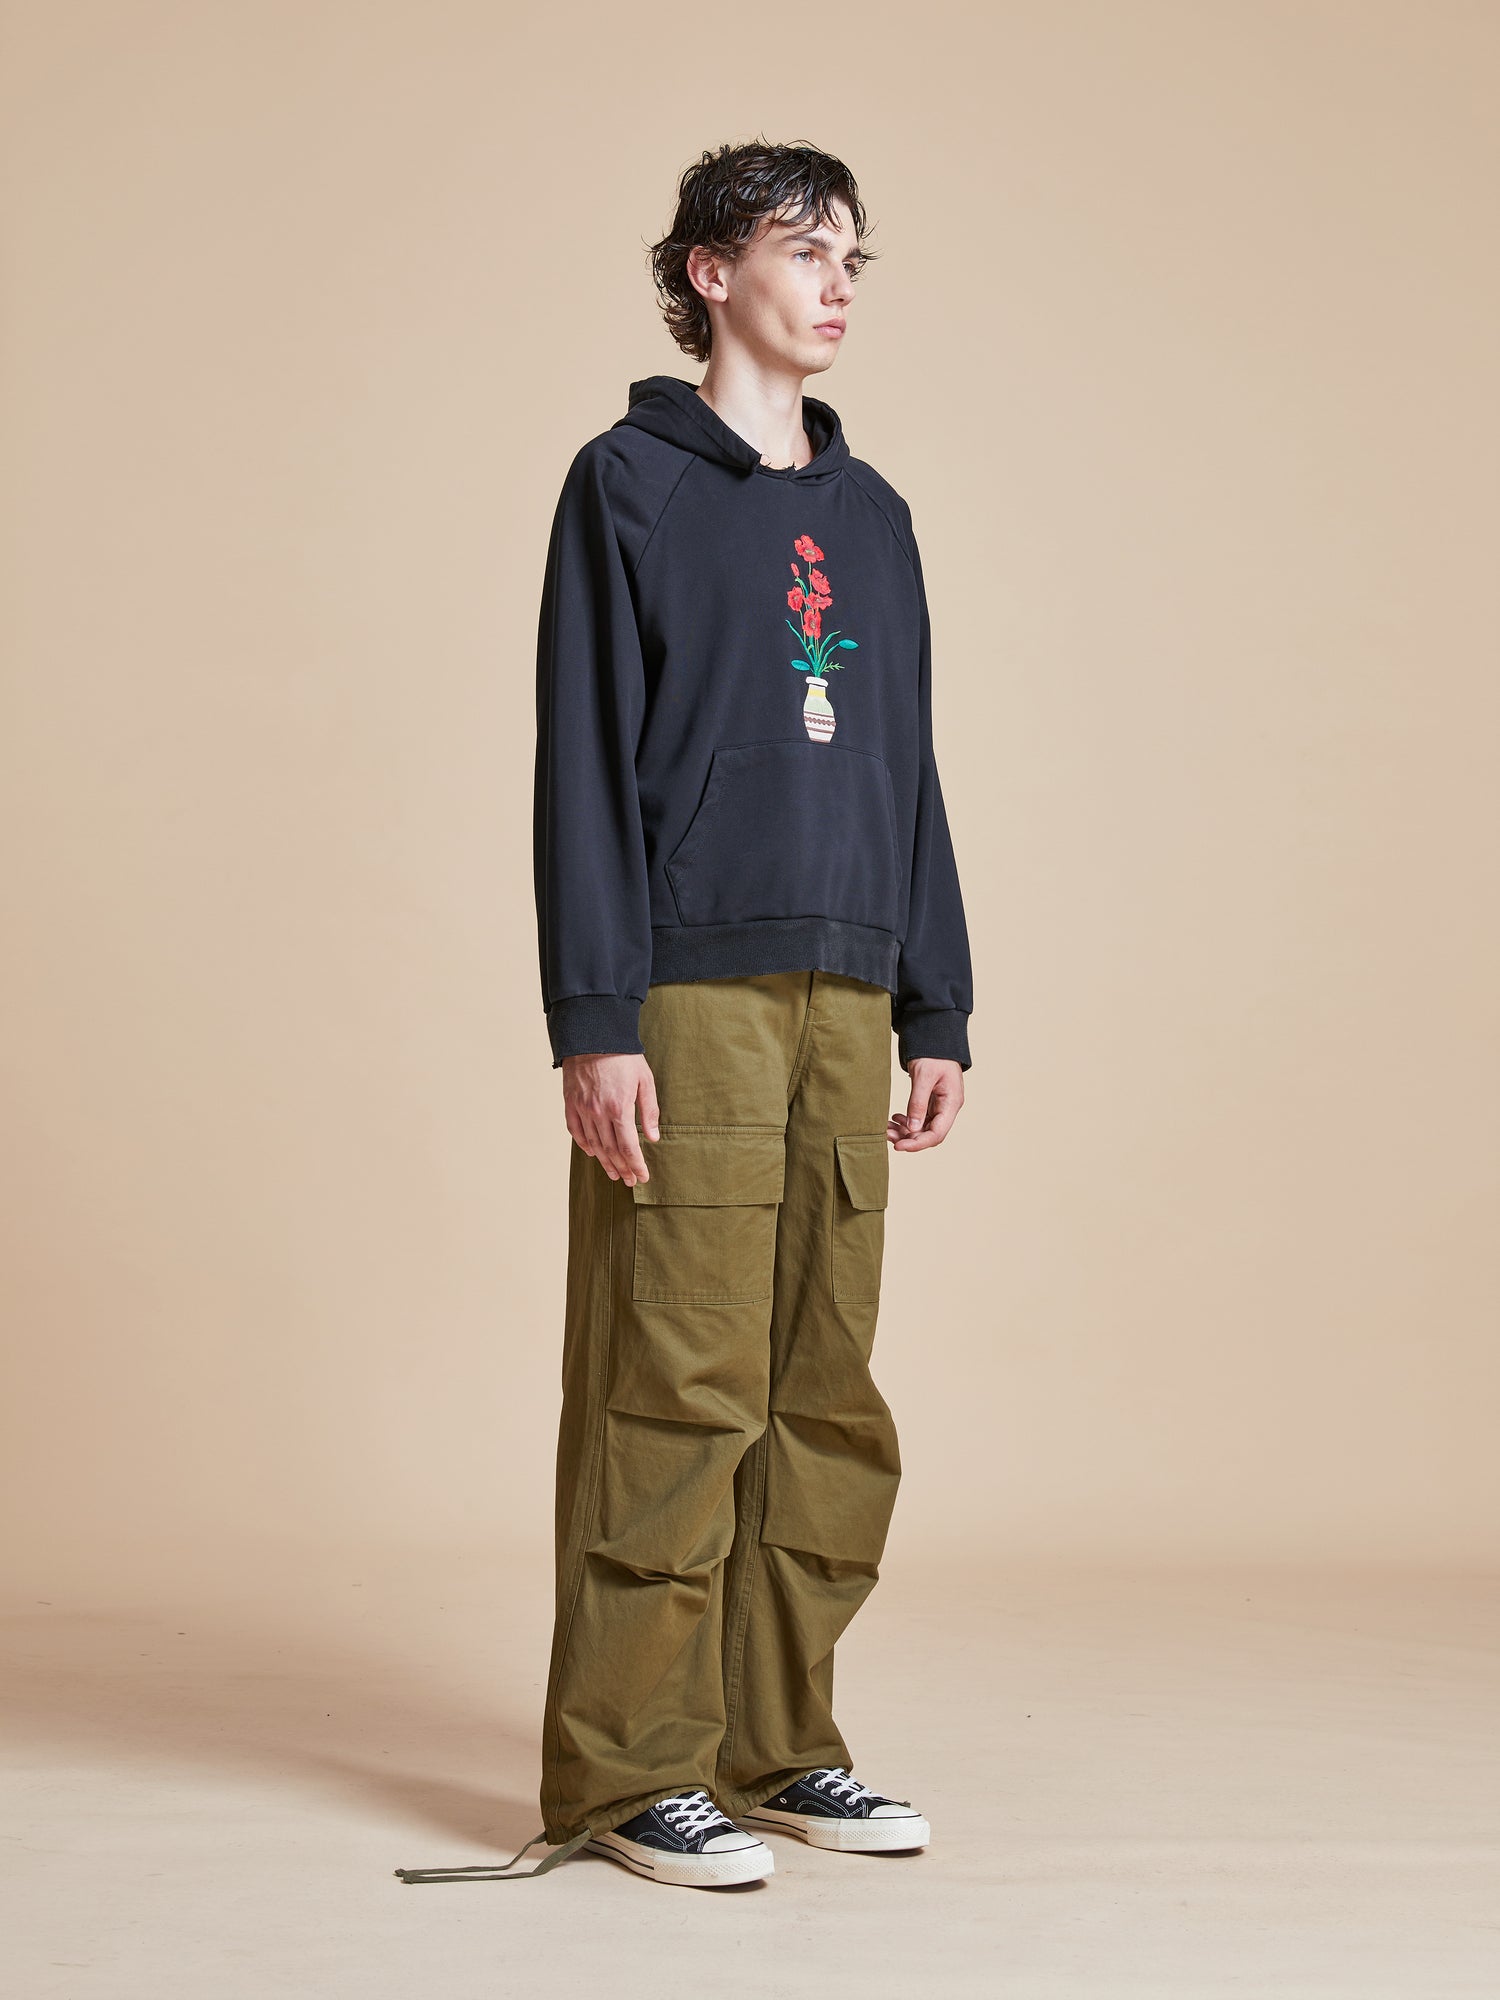 A man wearing a Found Flowers Vase Hoodie and cargo pants.